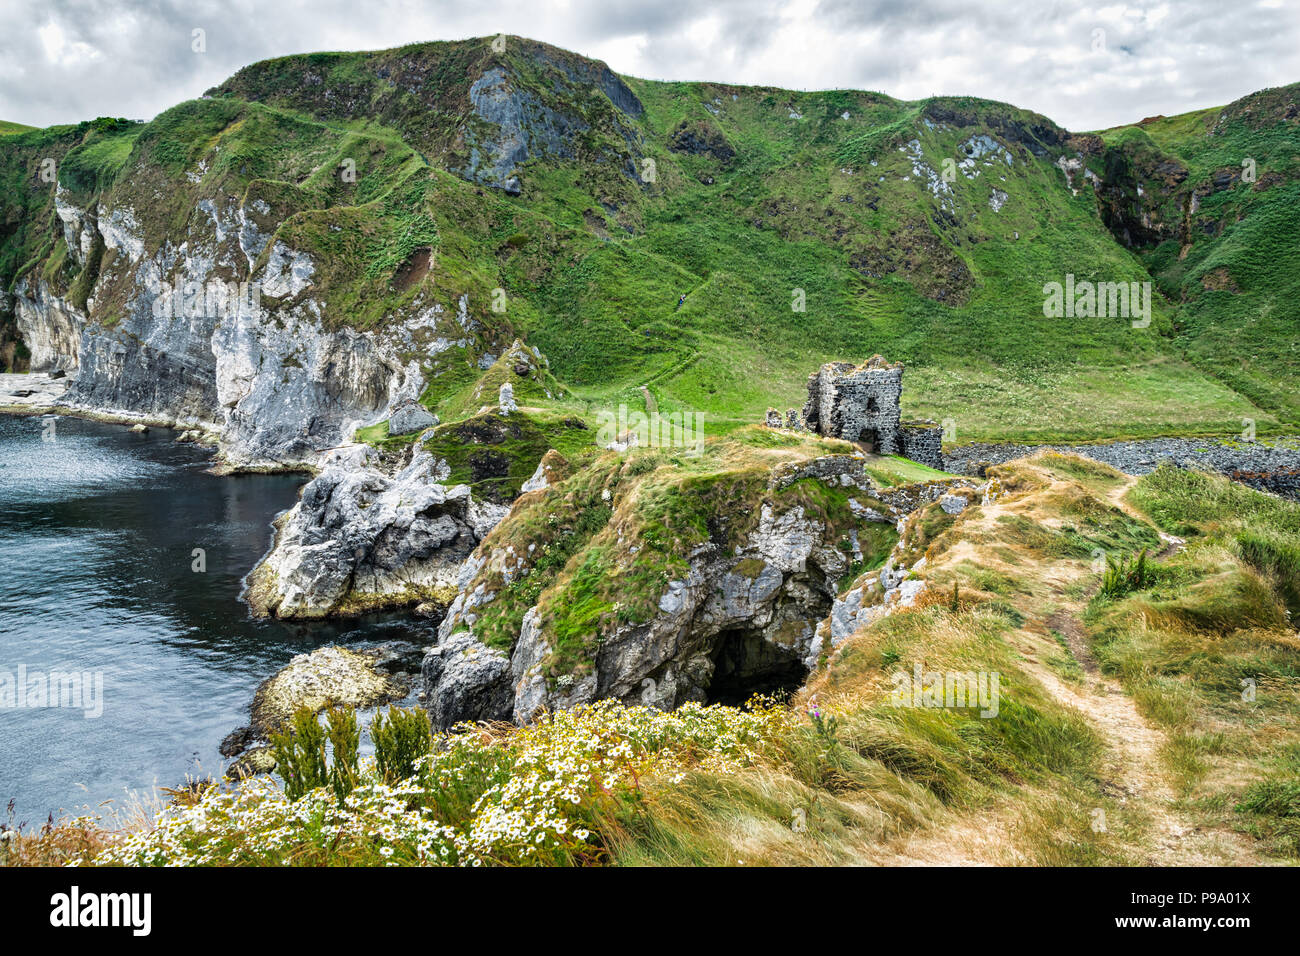 Thi is Kinbane Castle which was built on a small peninsula of sea cliffs that protrude into the Atlantic Ocean close to the town of Ballycastle in Nor Stock Photo